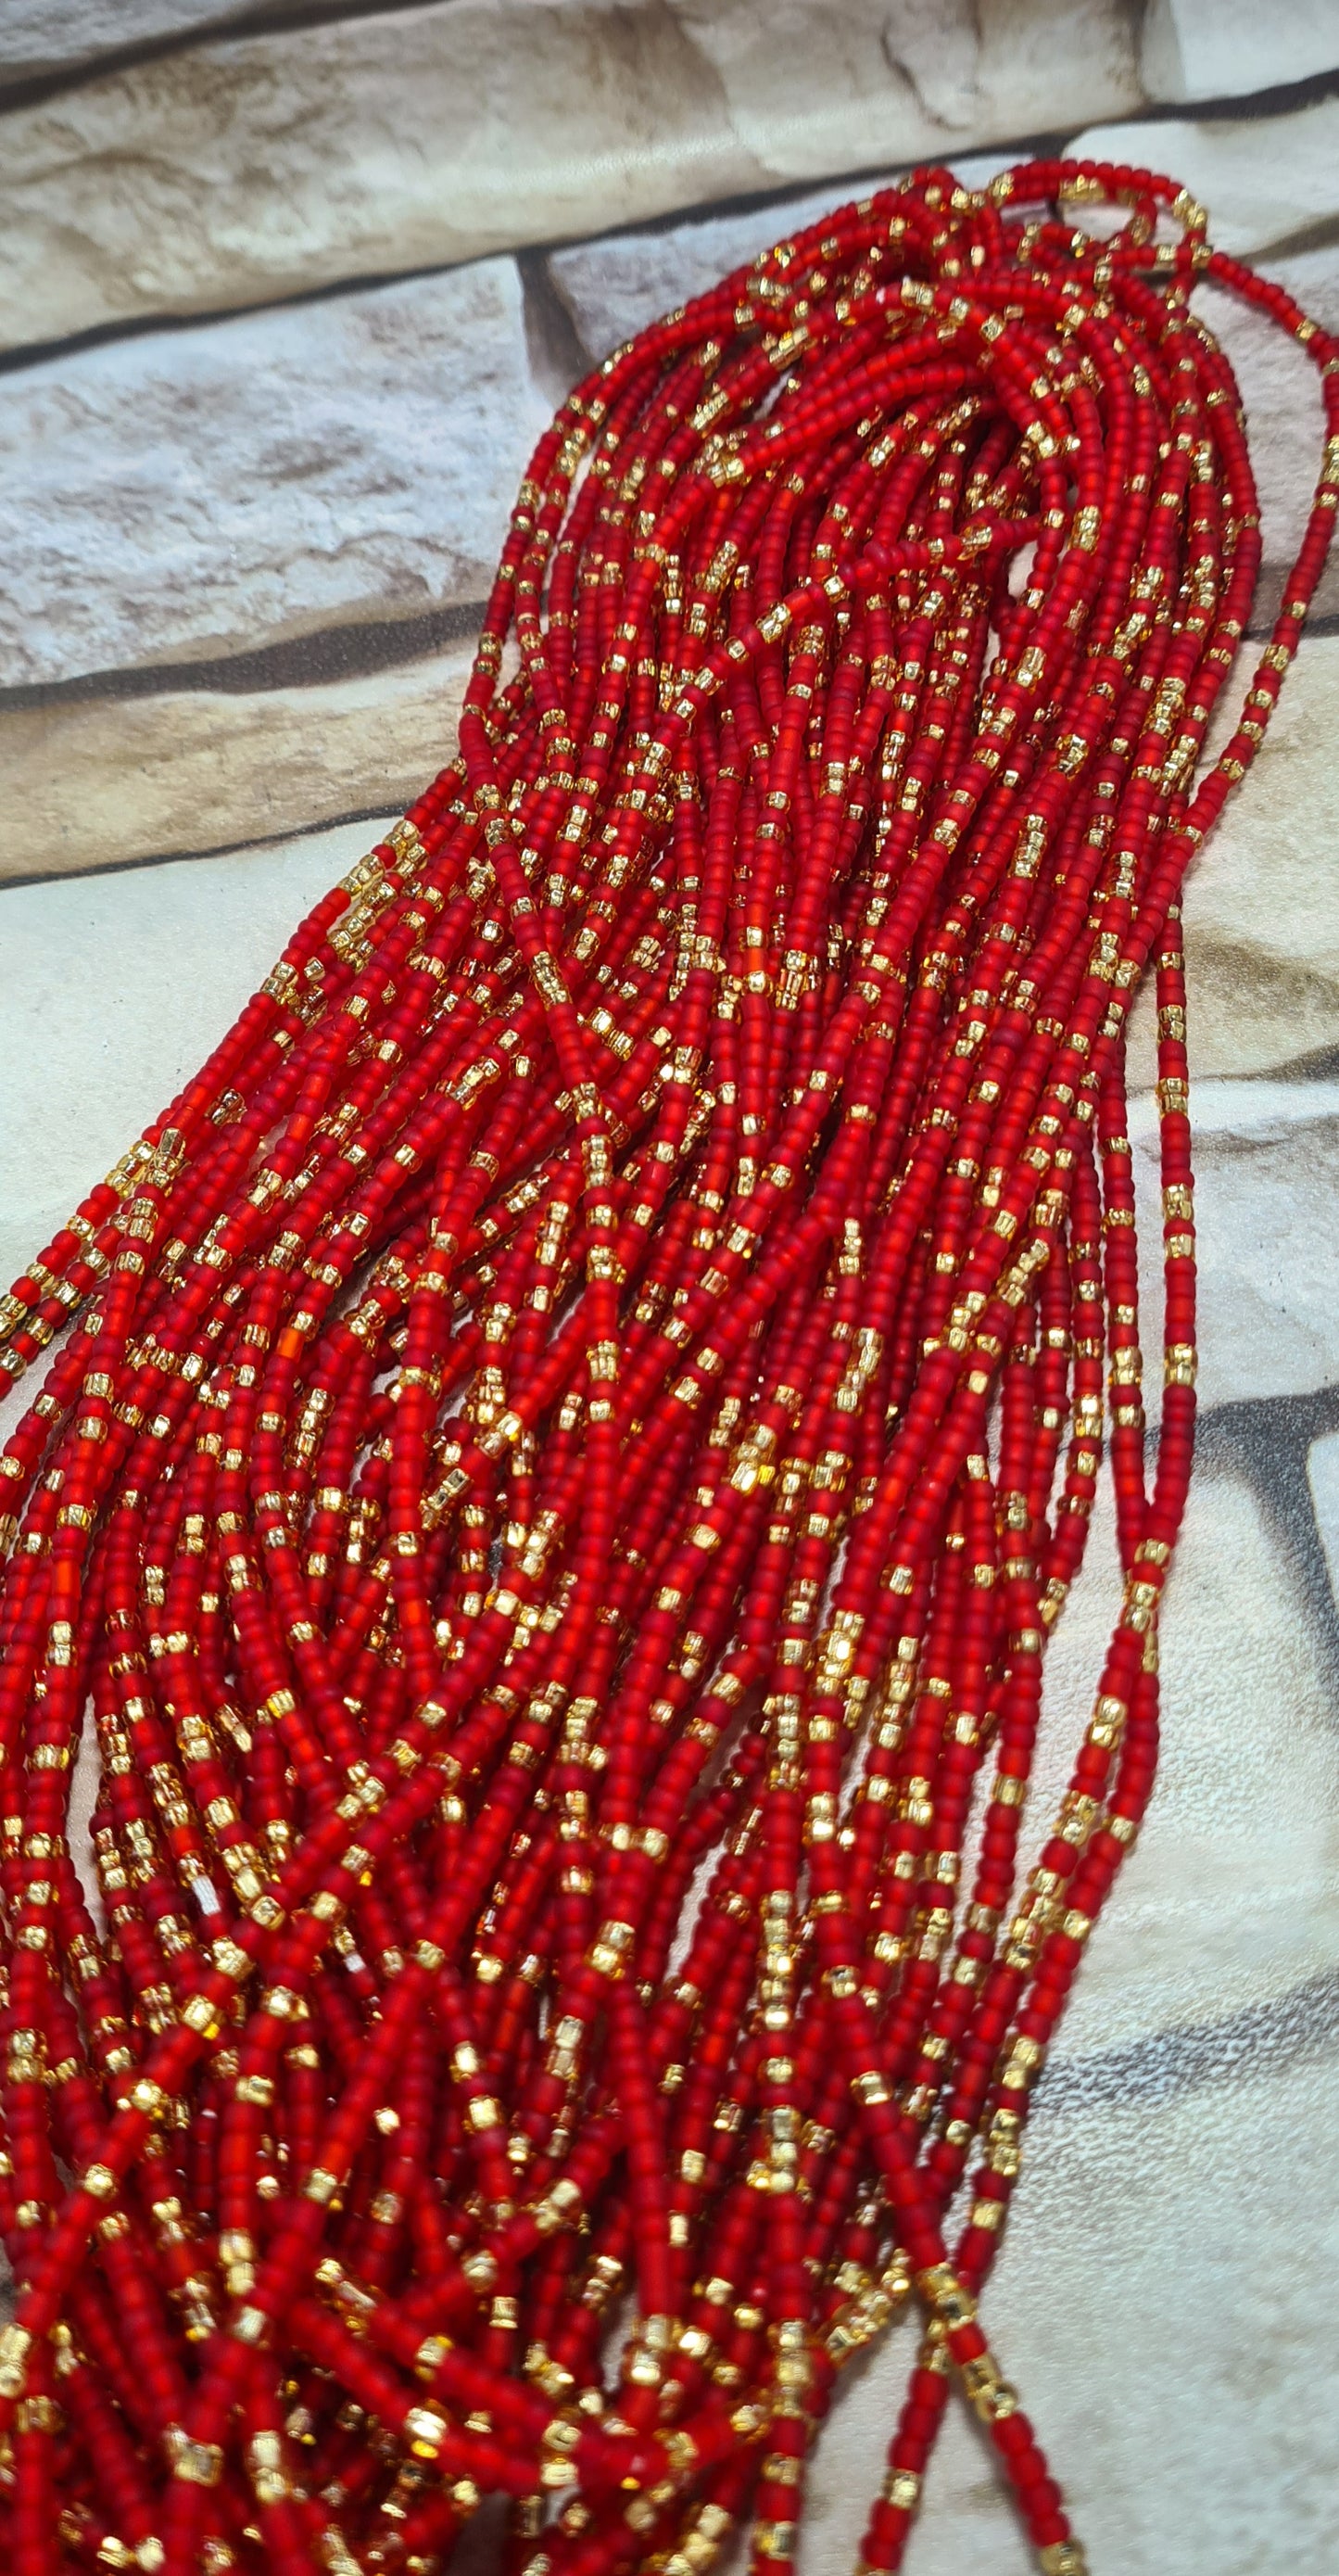 Red and Gold Waist Beads|On Sale Belly Chain Weight control African beads|belly beads| Ghana beads| Weight Tracker| Nigerian waist beads